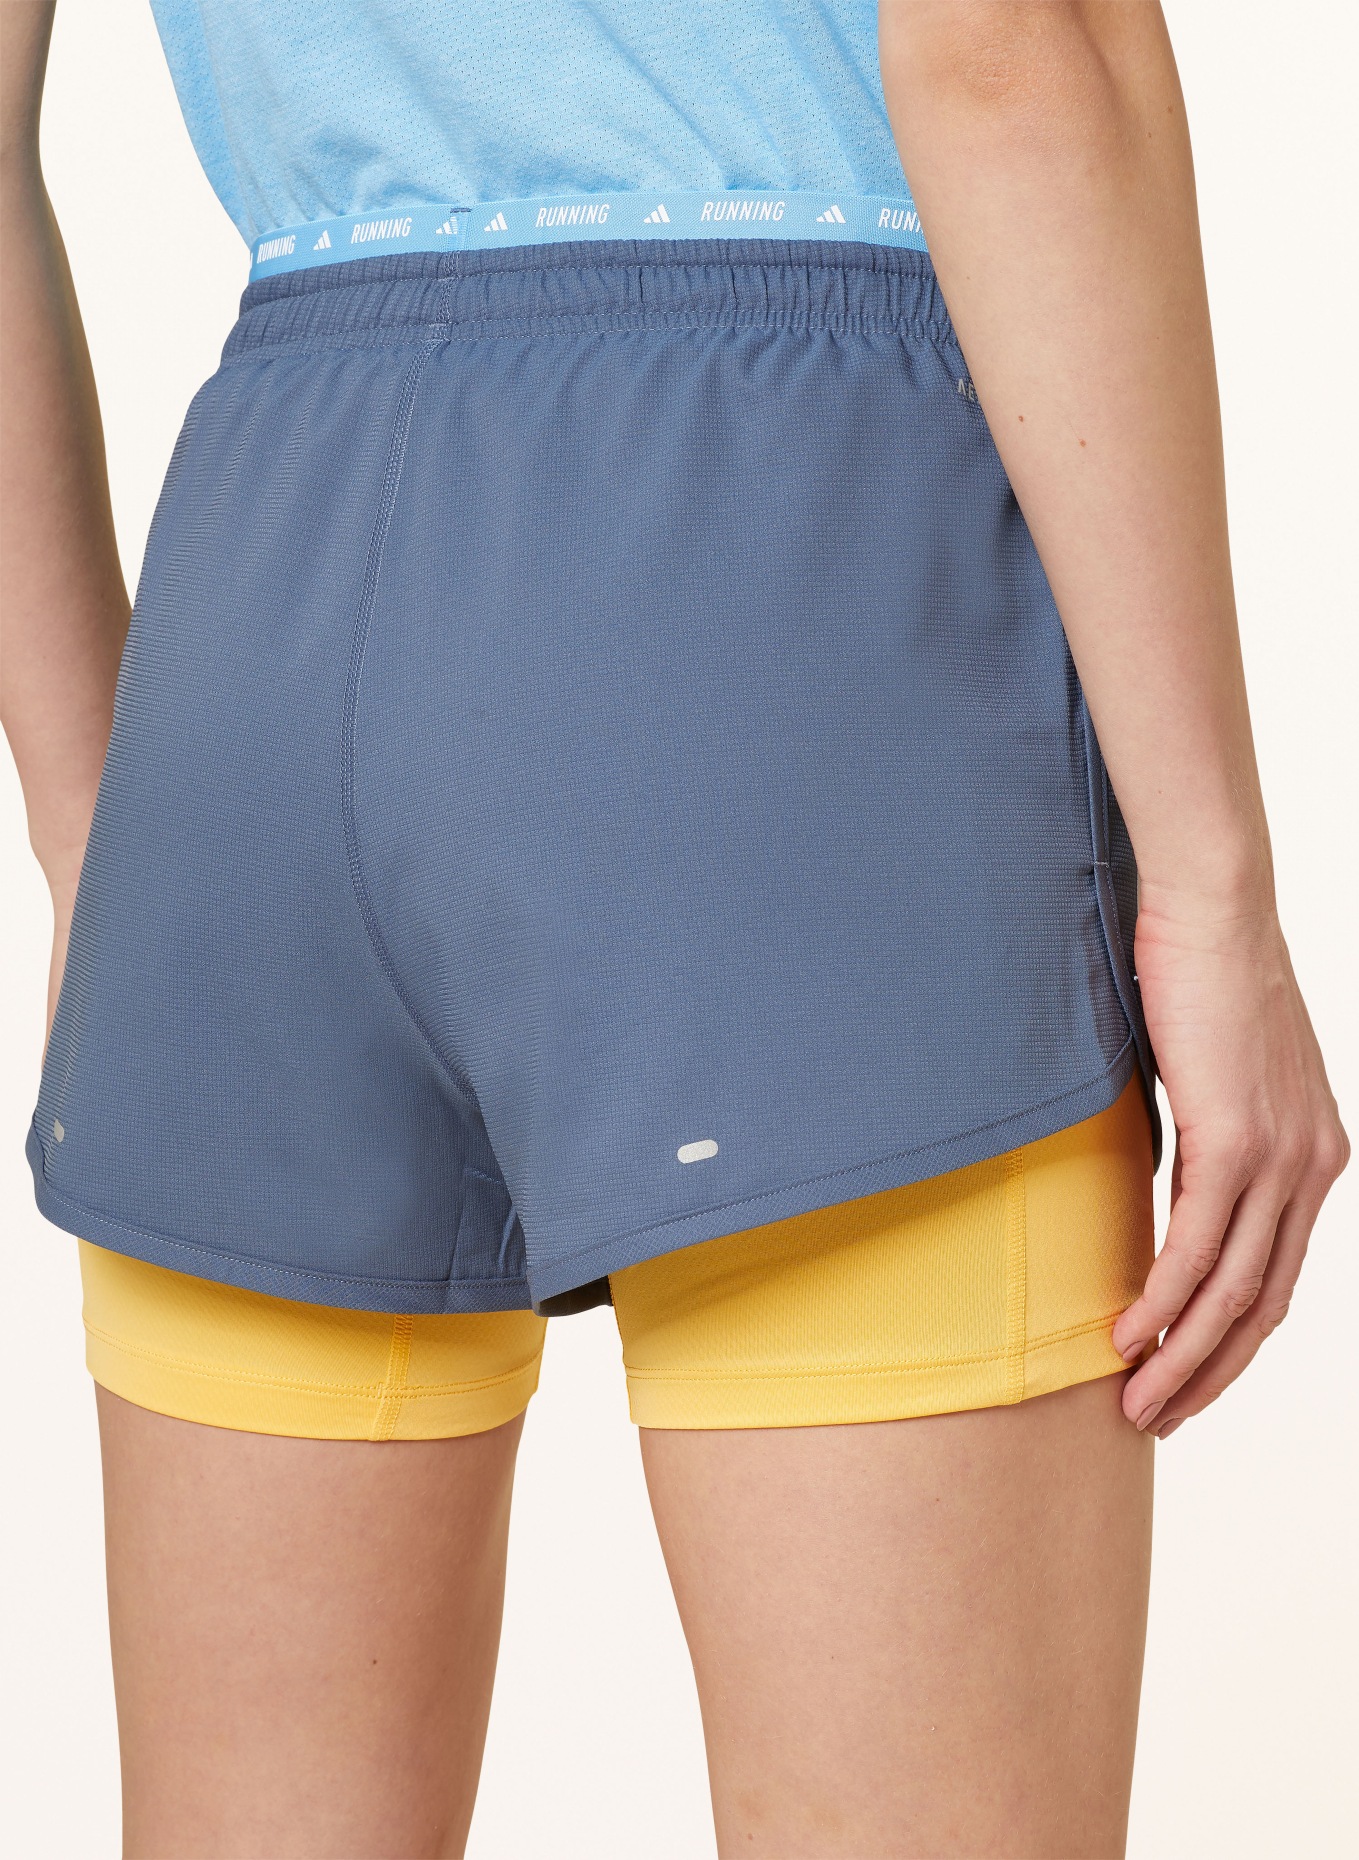 adidas 2-in-1 running shorts OWN THE RUN, Color: BLUE GRAY/ YELLOW (Image 6)